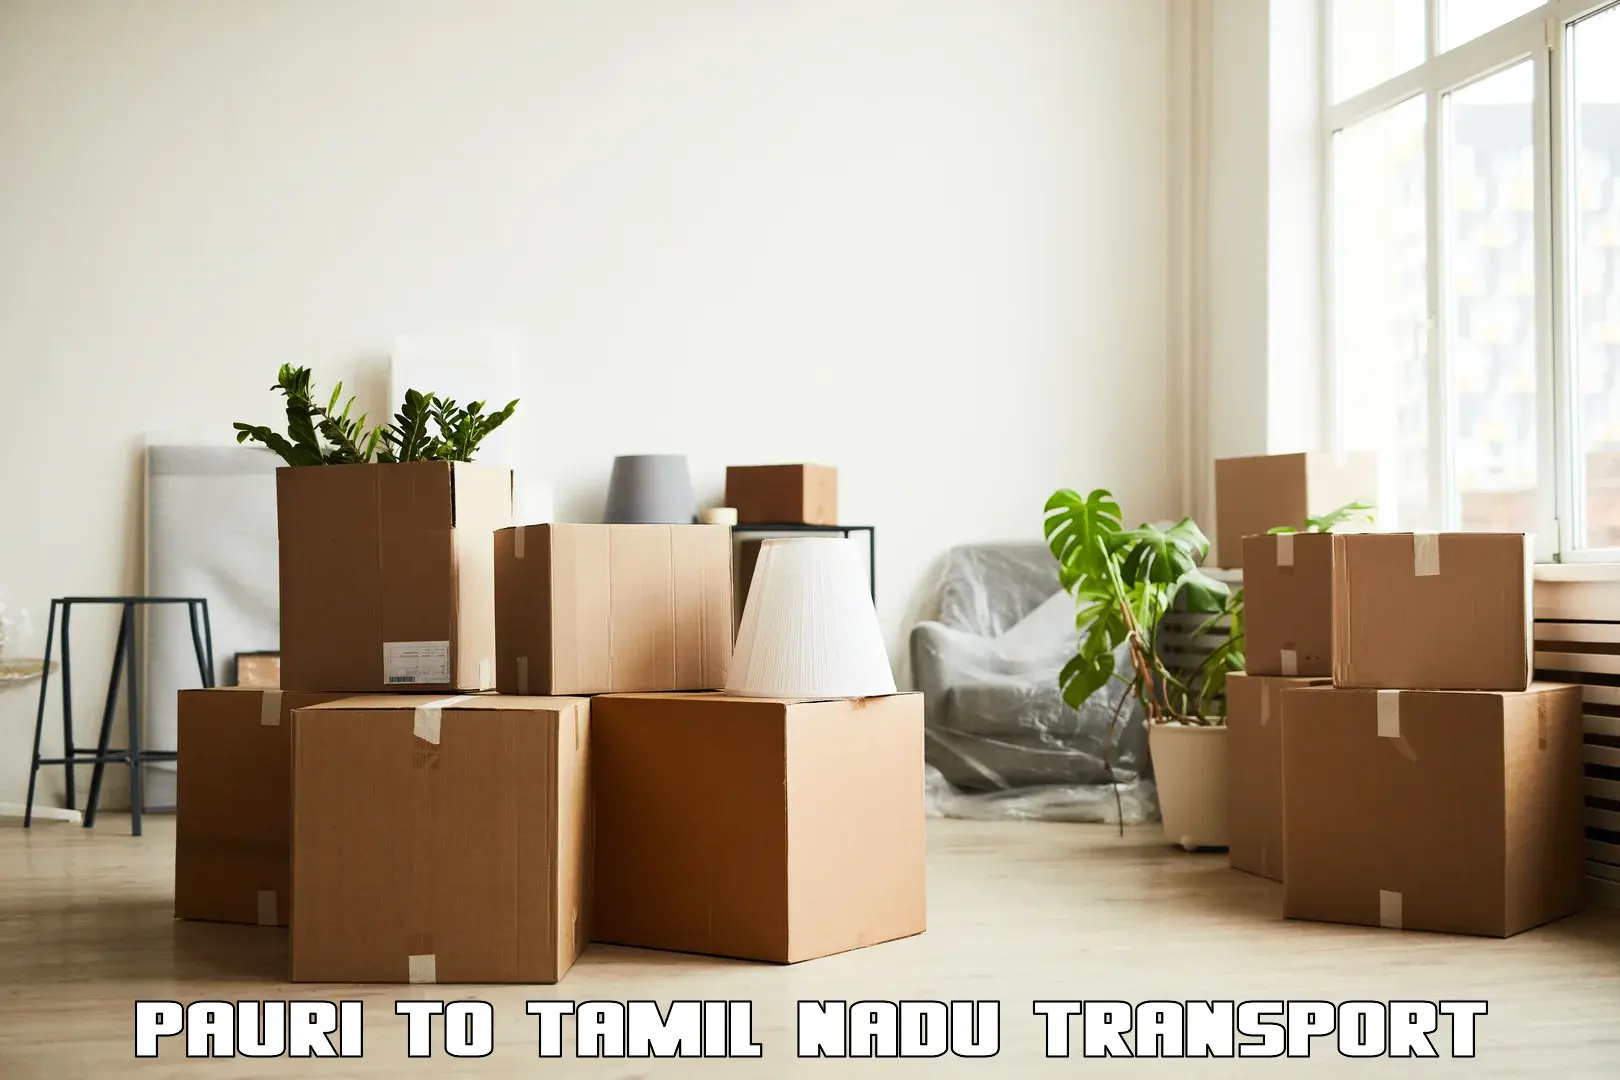 Lorry transport service Pauri to Vellore Institute of Technology